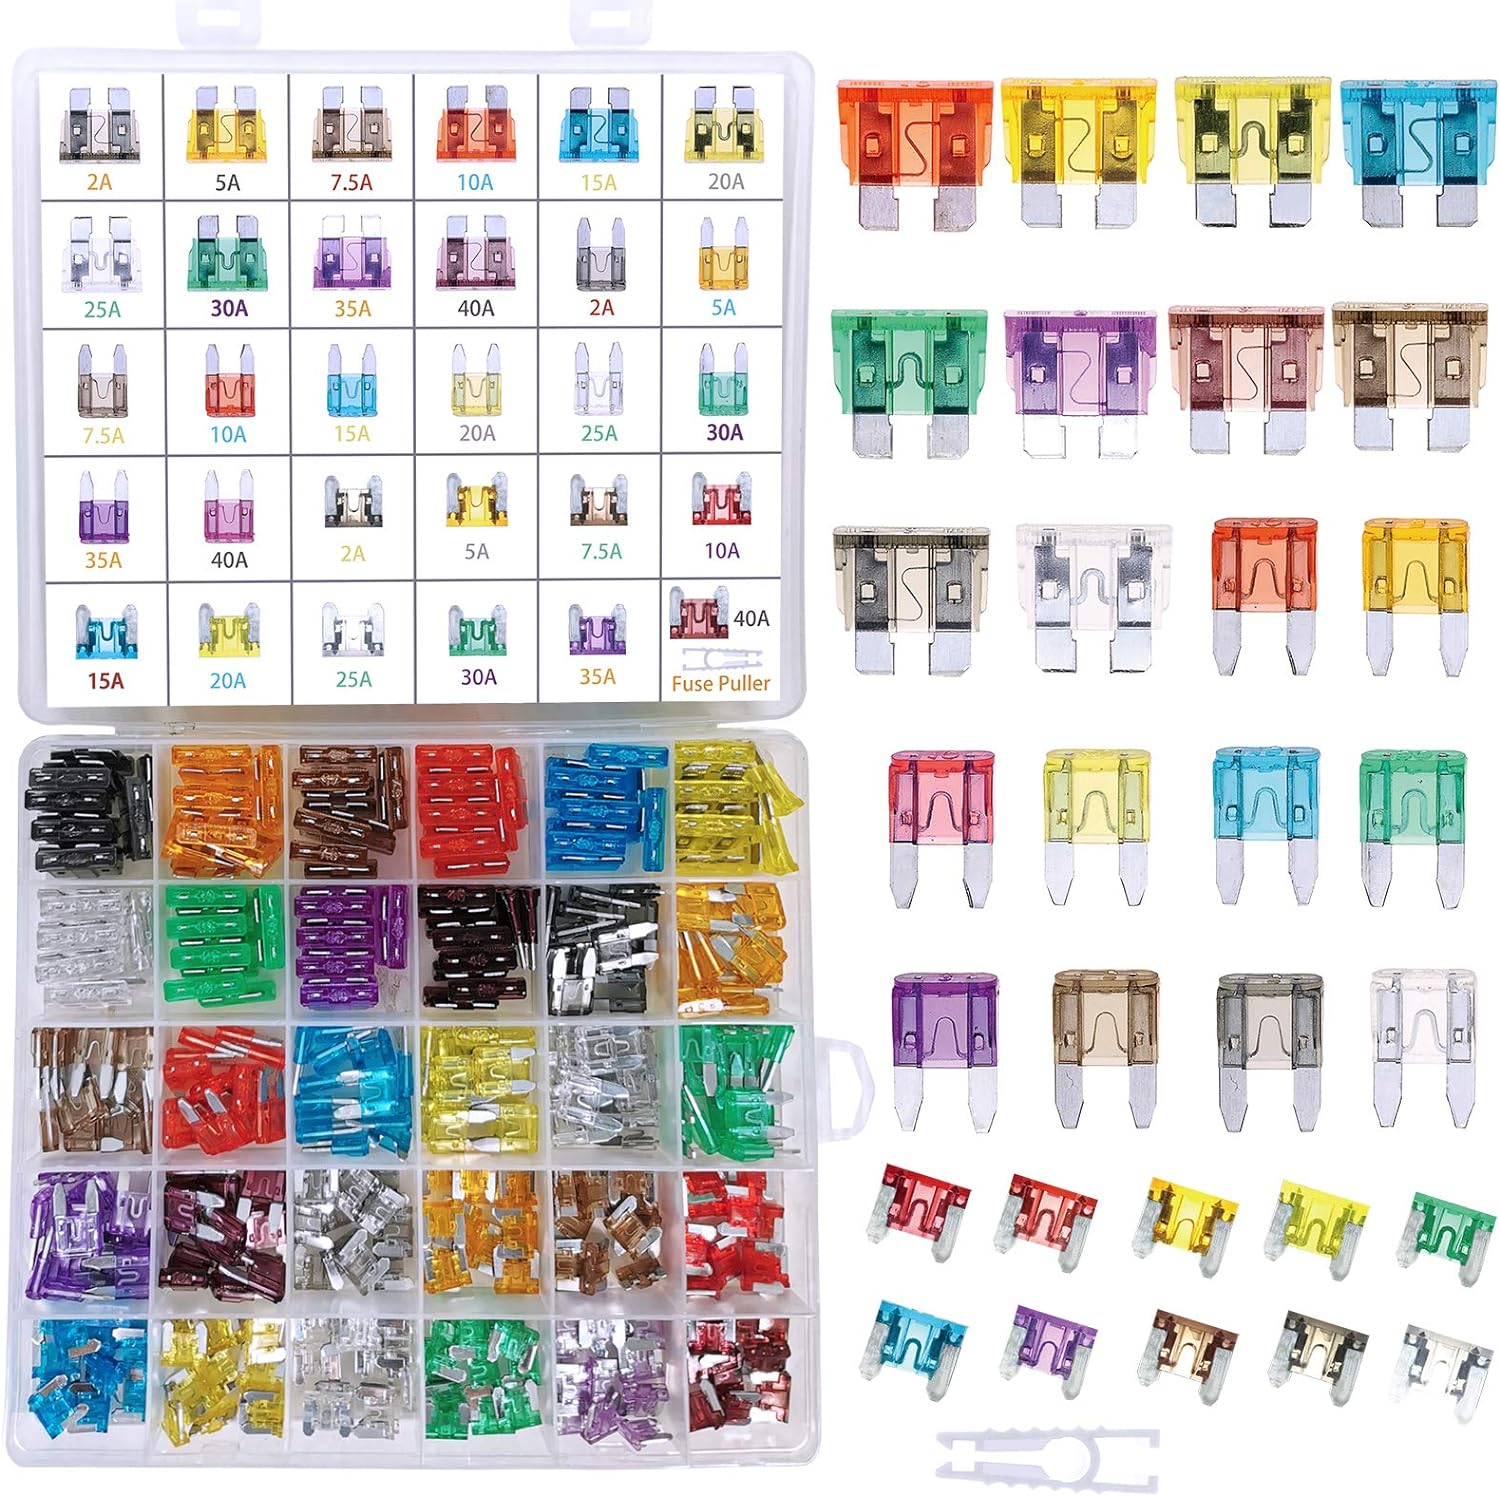 2A/3A/5A/7.5A/10A/15A/ 20A/25A/30A/40AMP/ATC/ATO Blade Fuses Automotive Truck Camper RV Standard and Mini Size 266 Pieces Car Fuses Assortment Kit Boat Replacement Fuses for Marine Auto